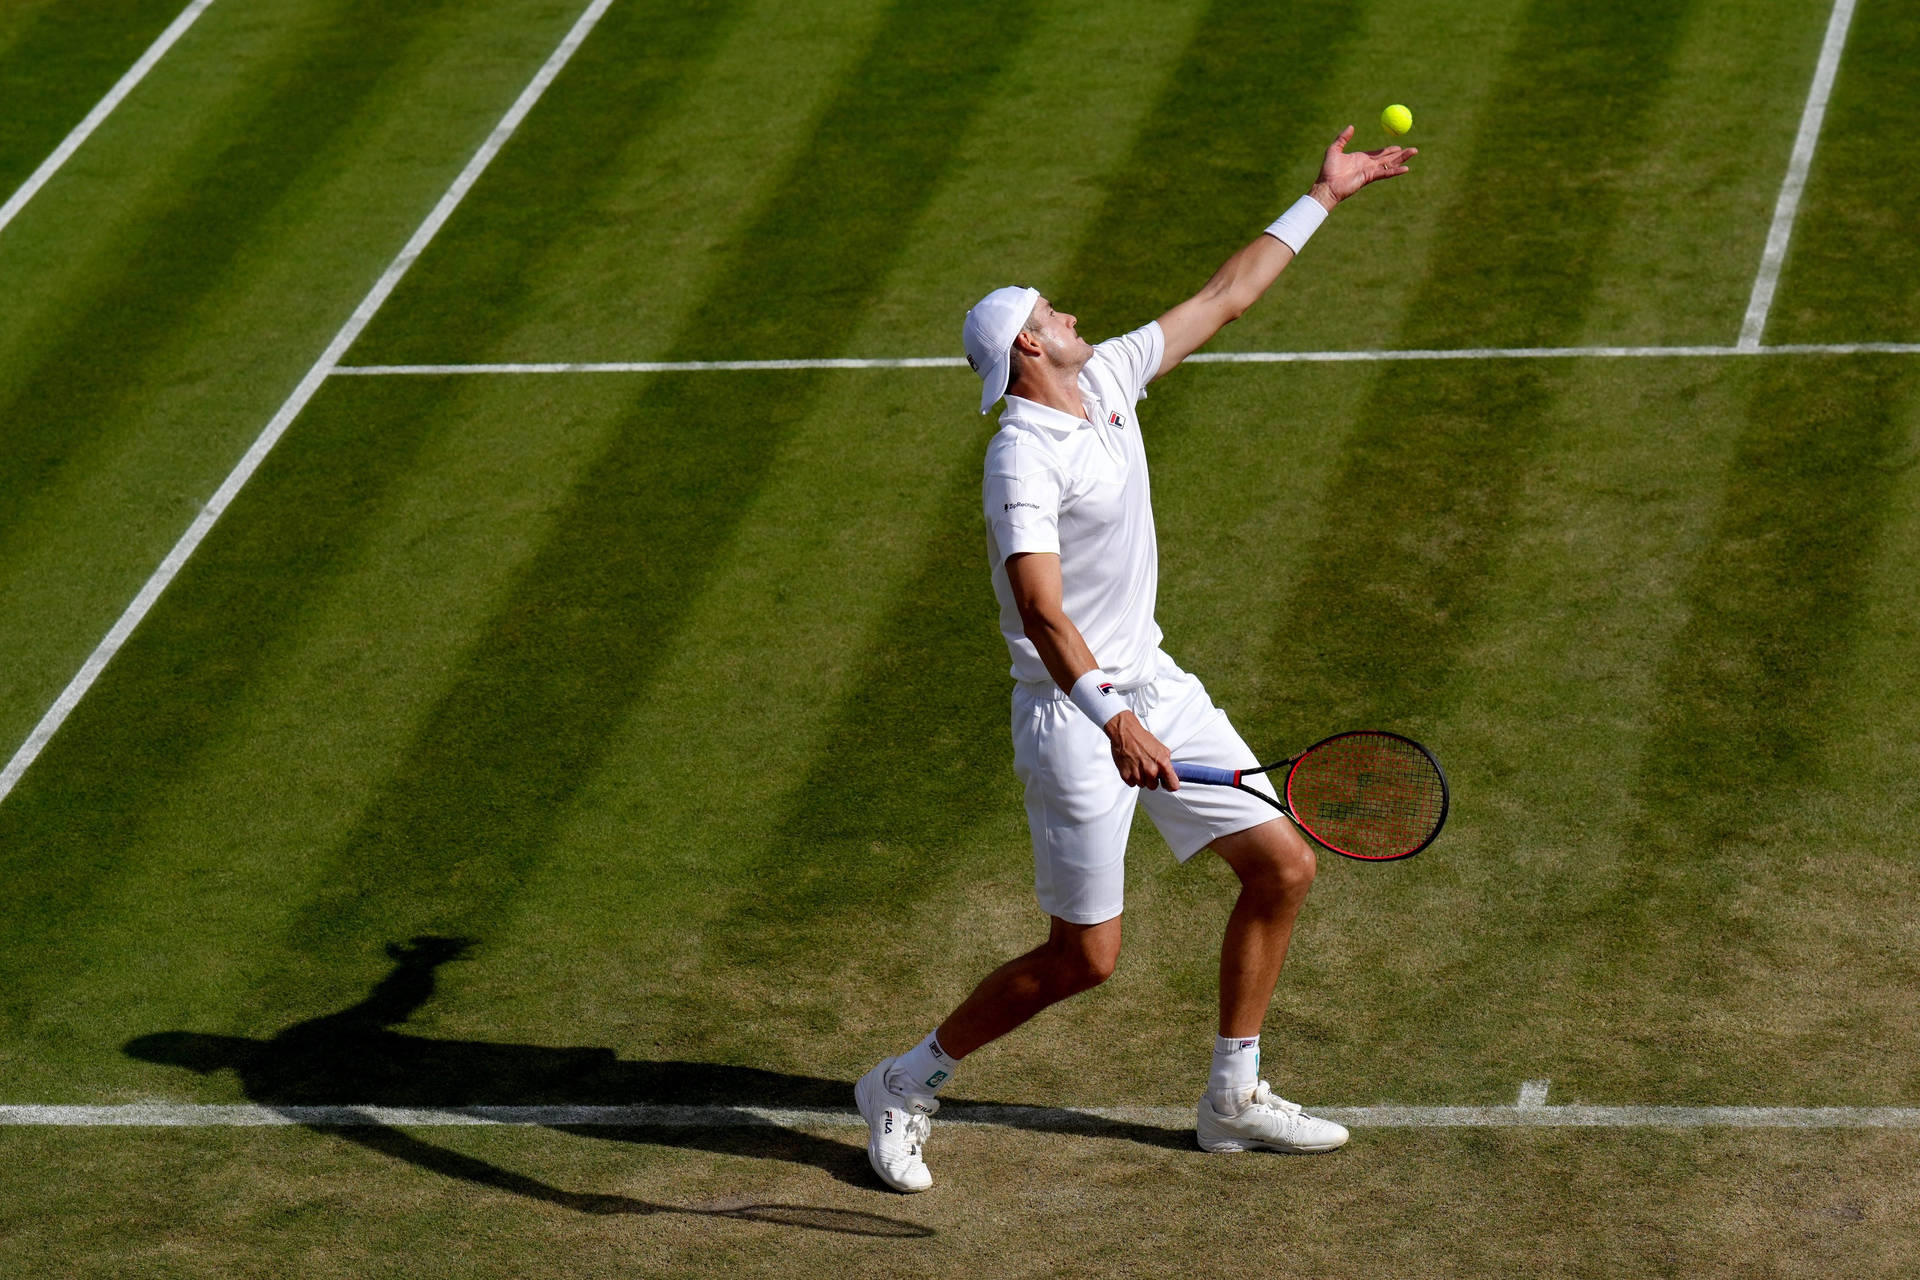 Johnisner Ball Toss May Refer To A Specific Image Or Wallpaper Depicting John Isner, A Professional Tennis Player, During His Ball Toss Motion Before Serving. Sfondo